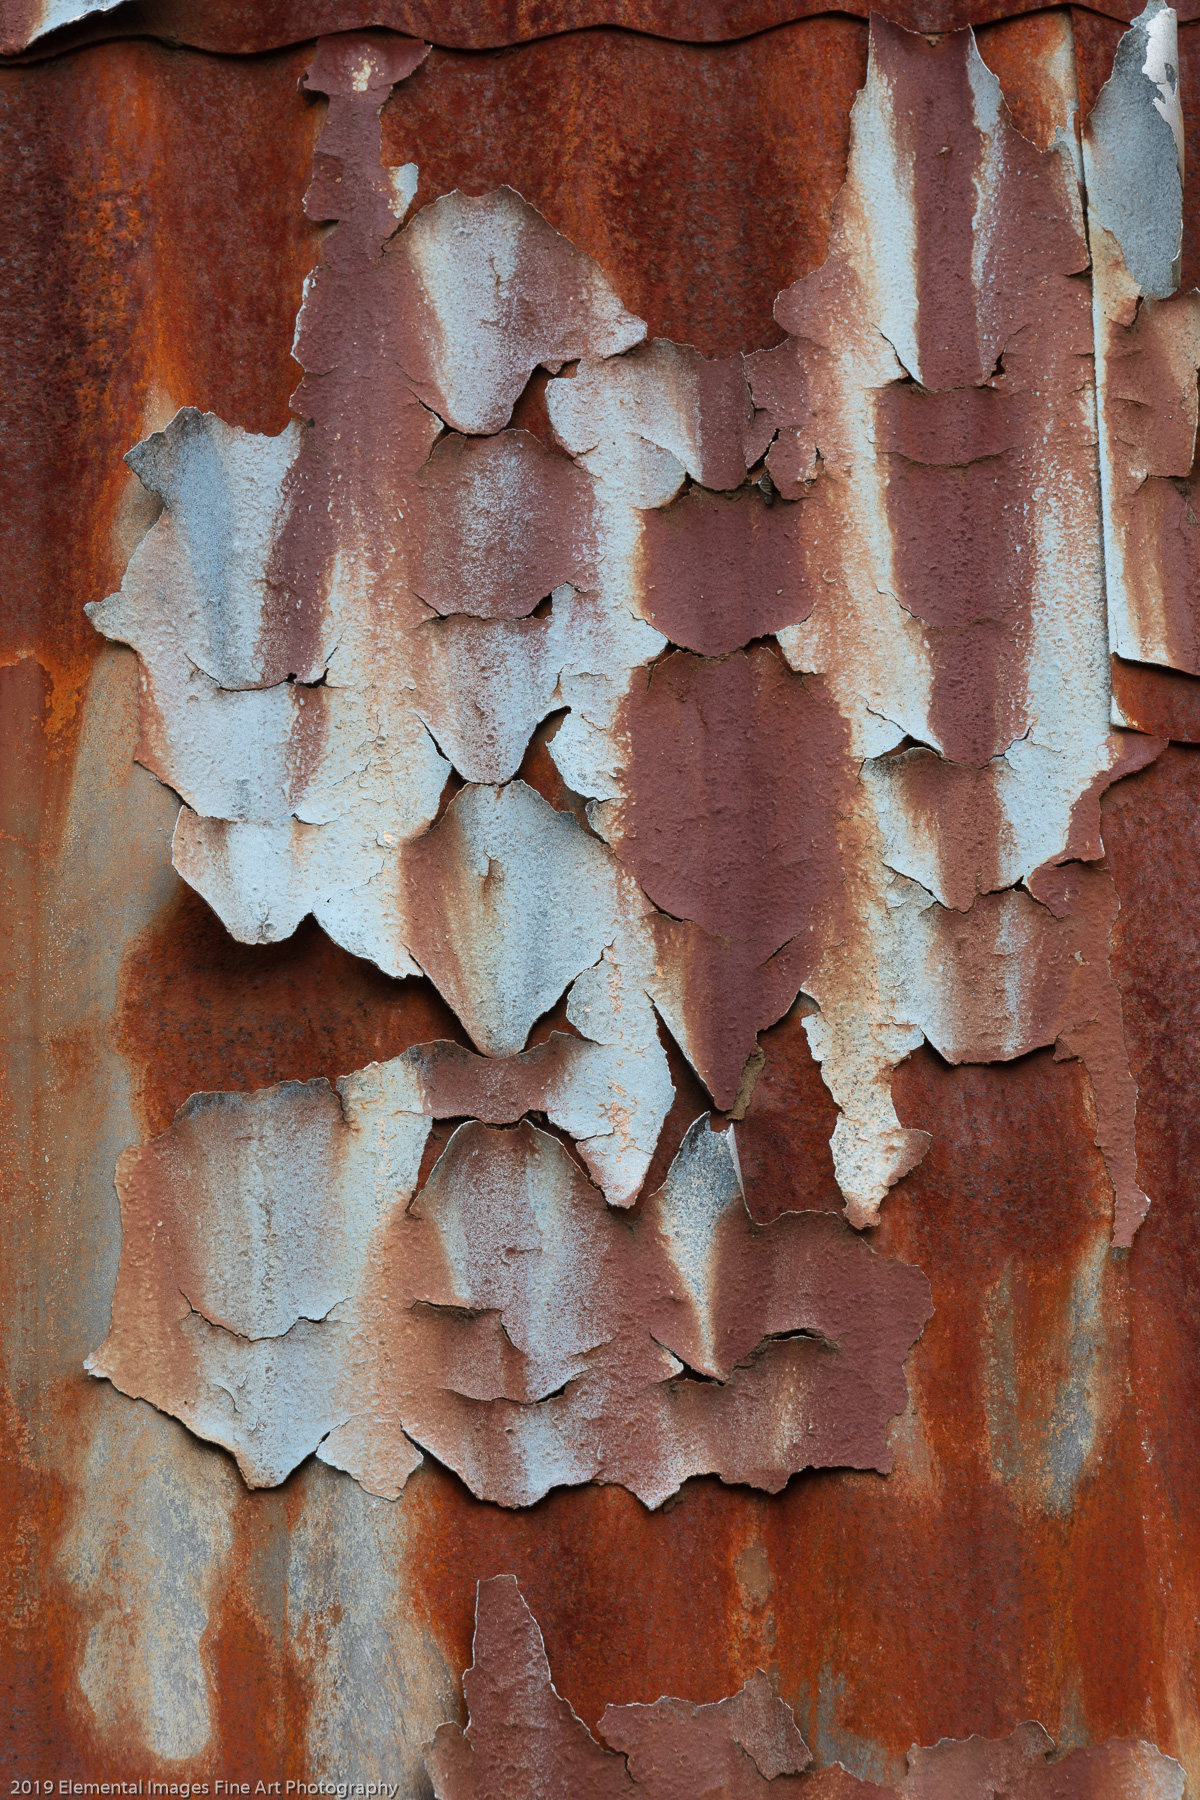 Rust #16 |  |  | USA - © 2019 Elemental Images Fine Art Photography - All Rights Reserved Worldwide